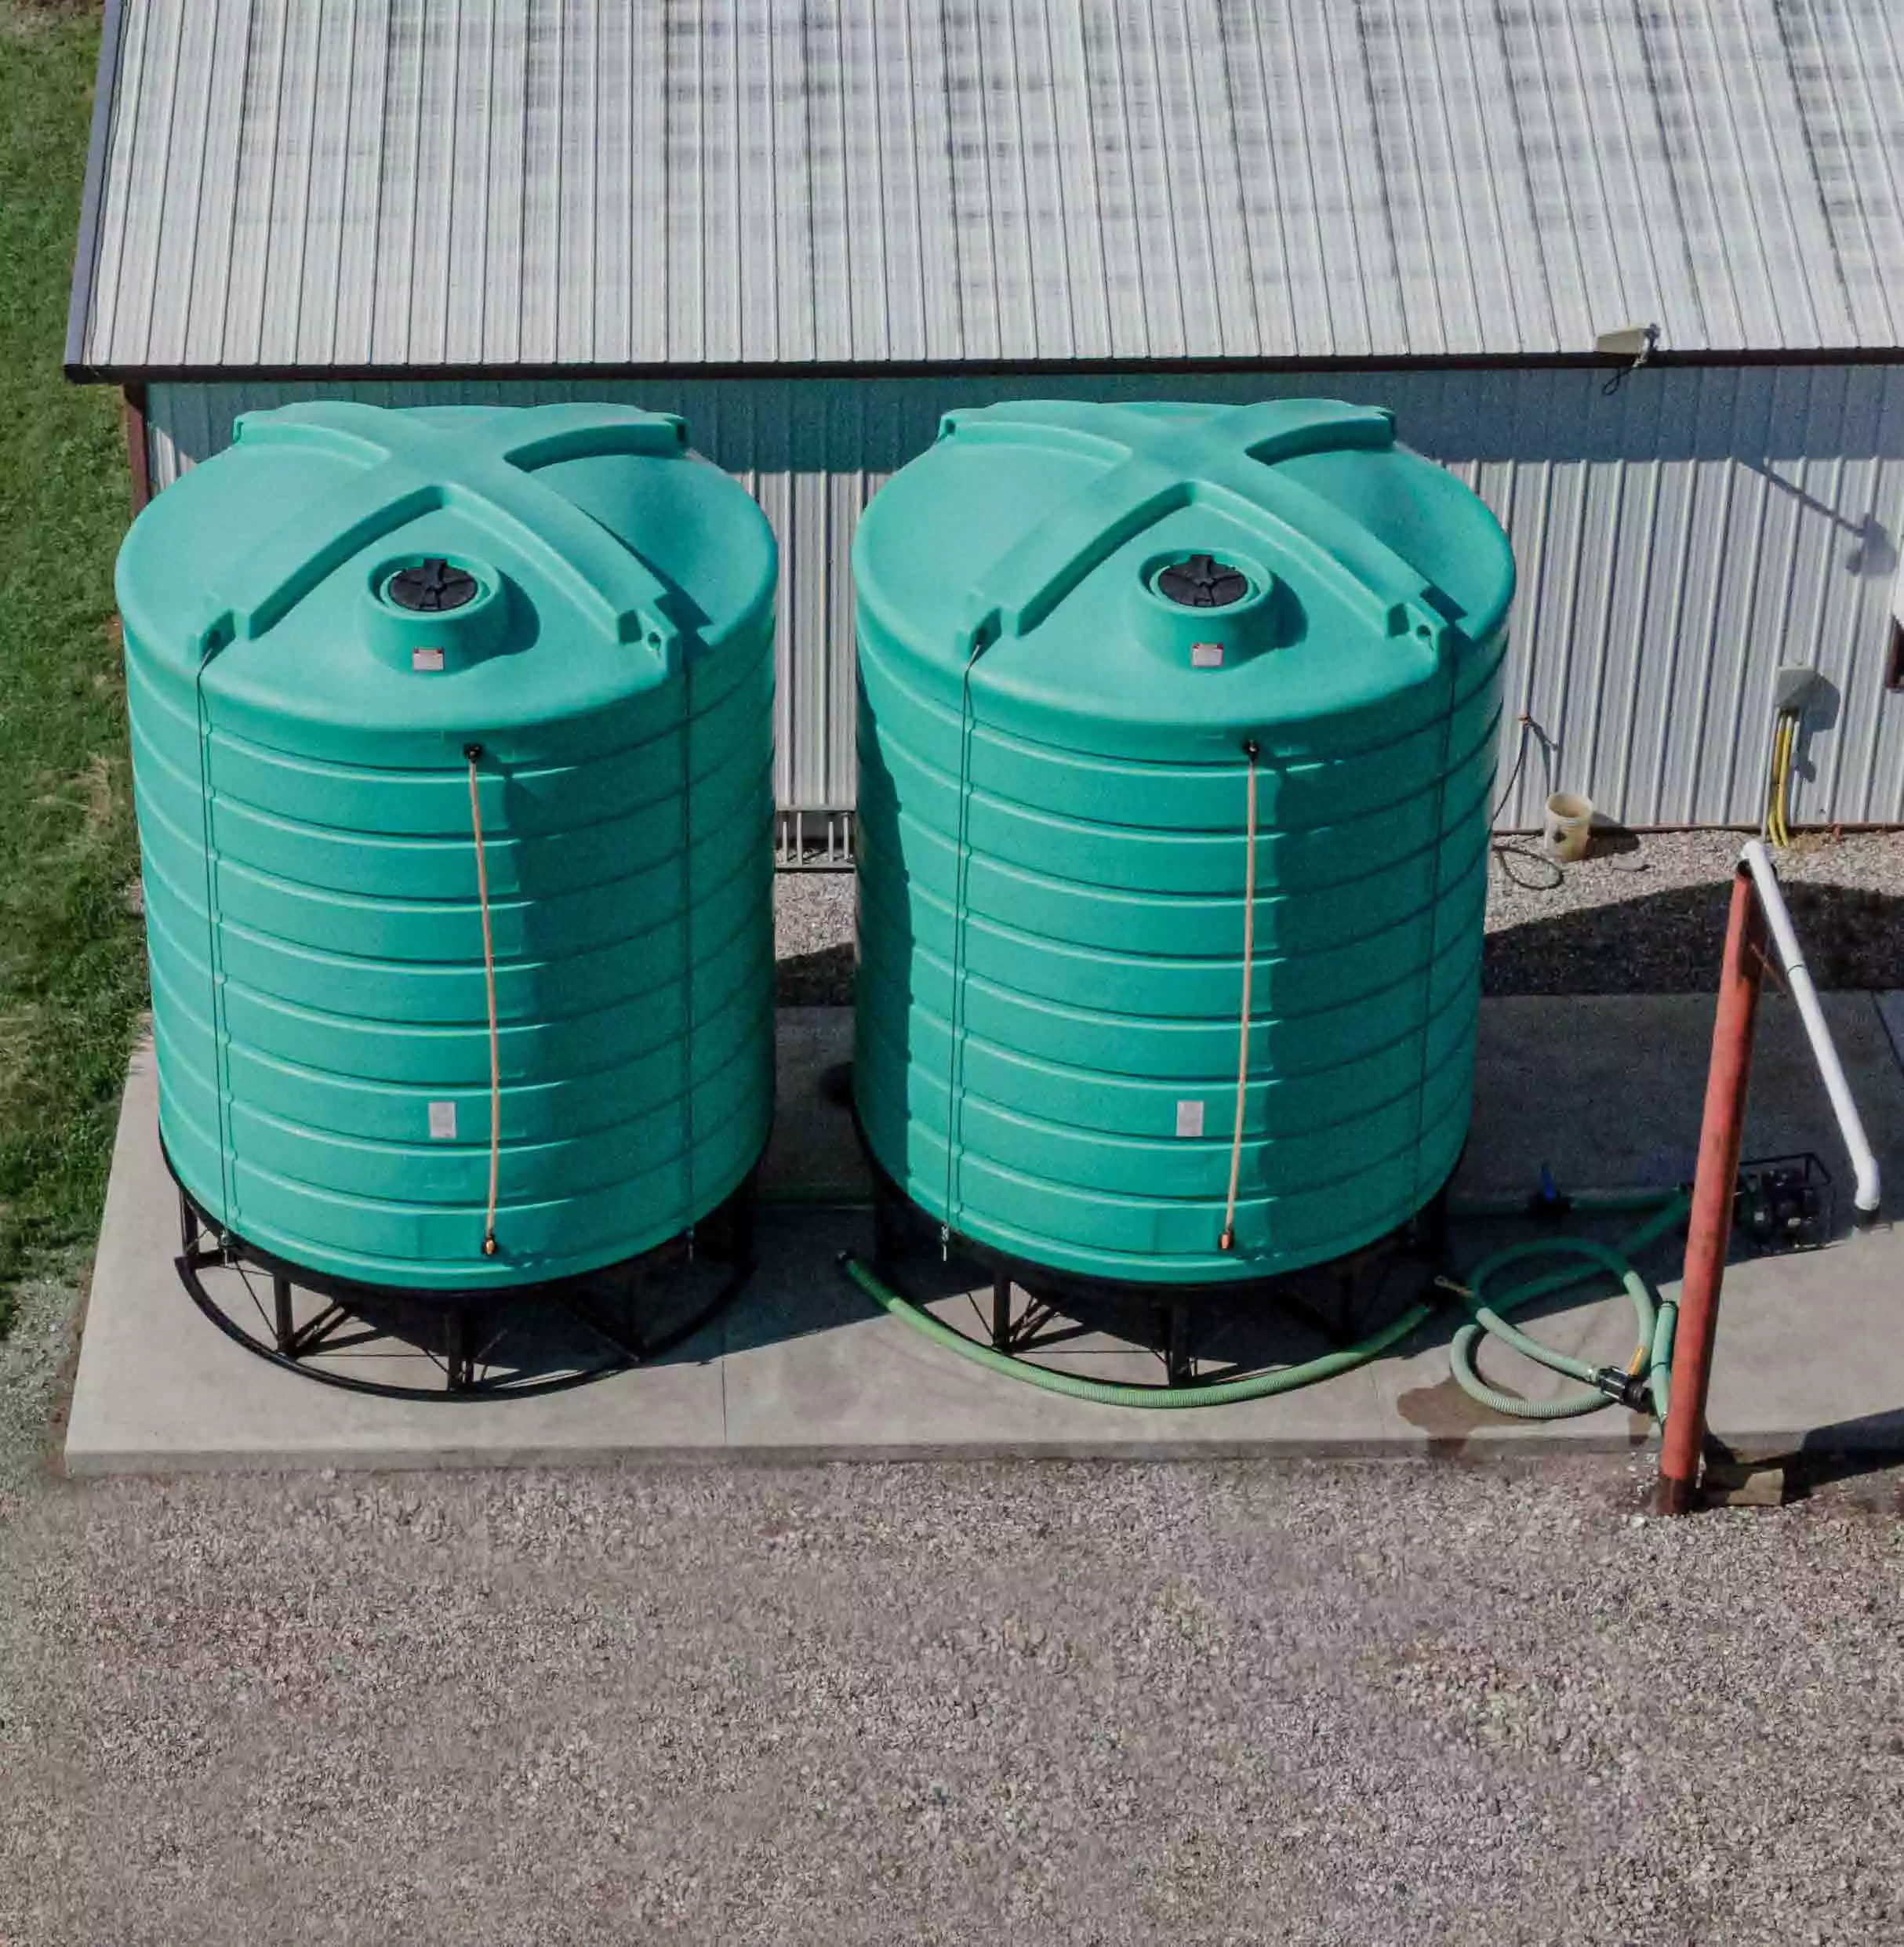 Top view of two blue cone bottom tanks on stands